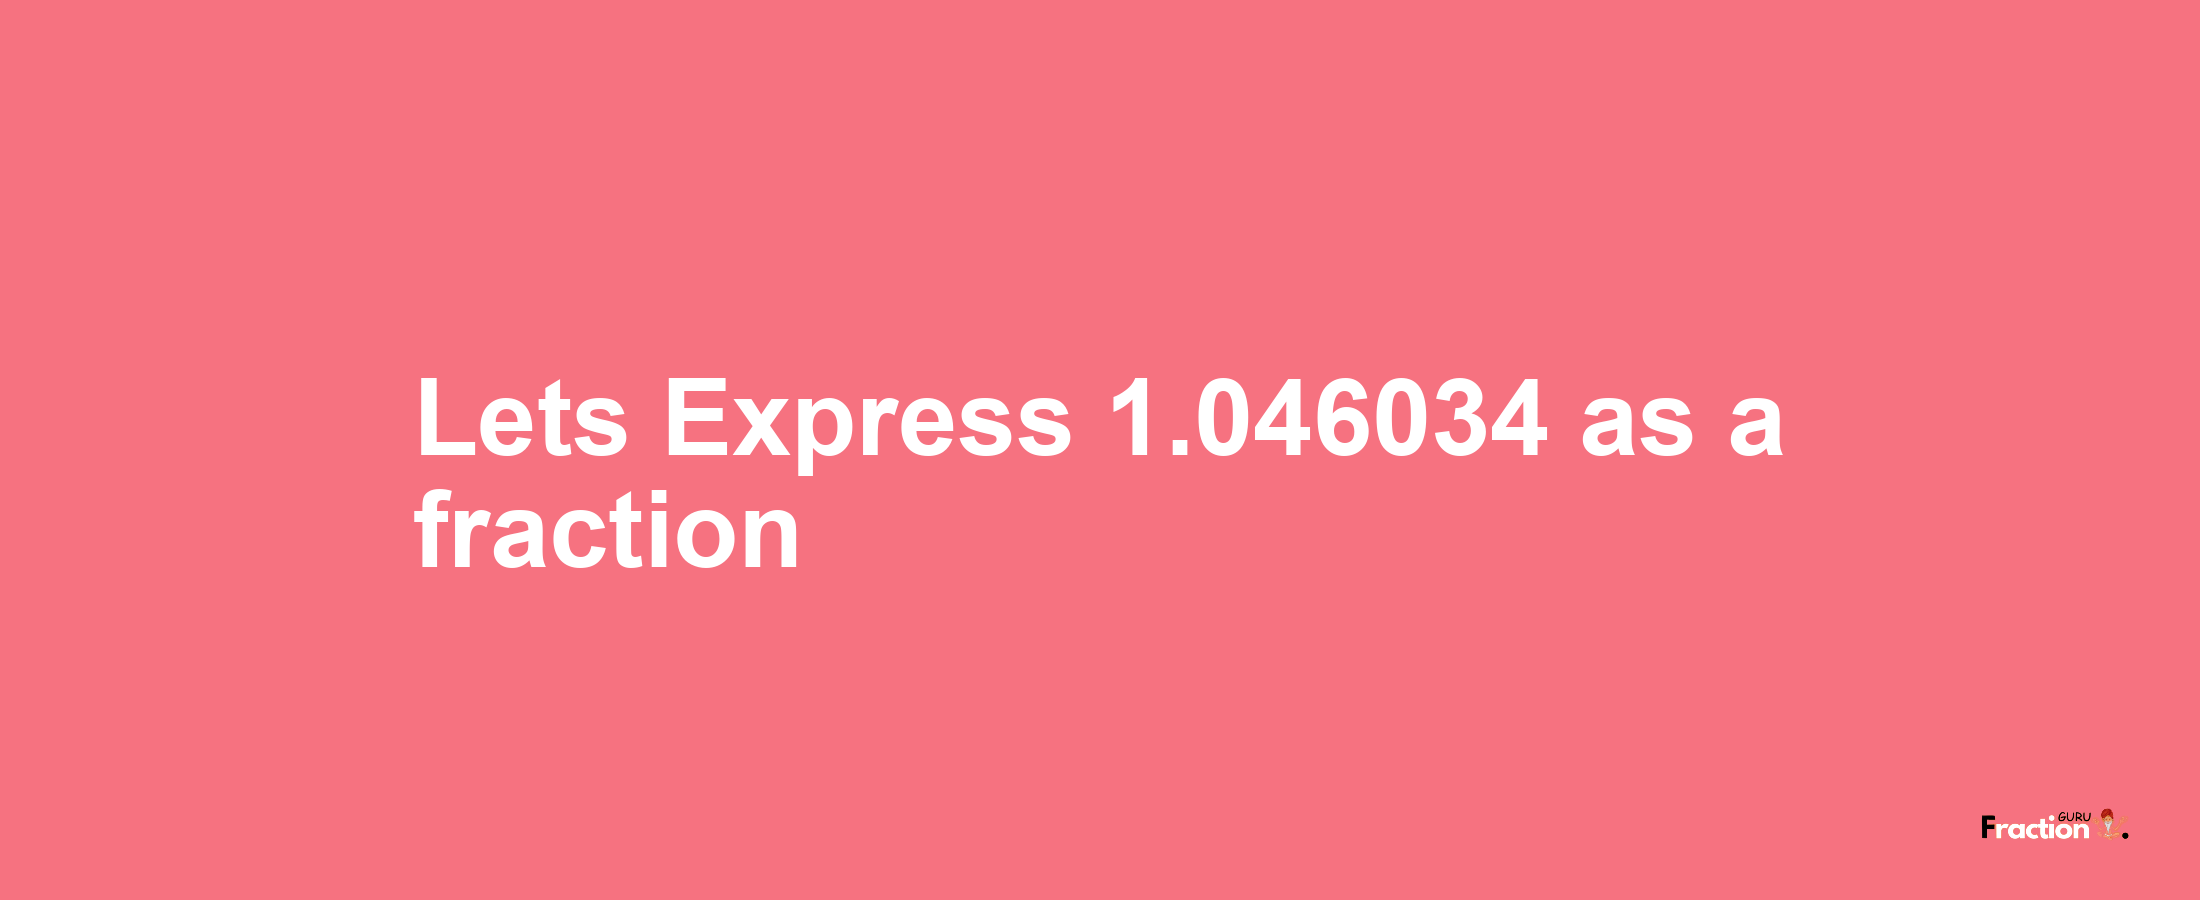 Lets Express 1.046034 as afraction